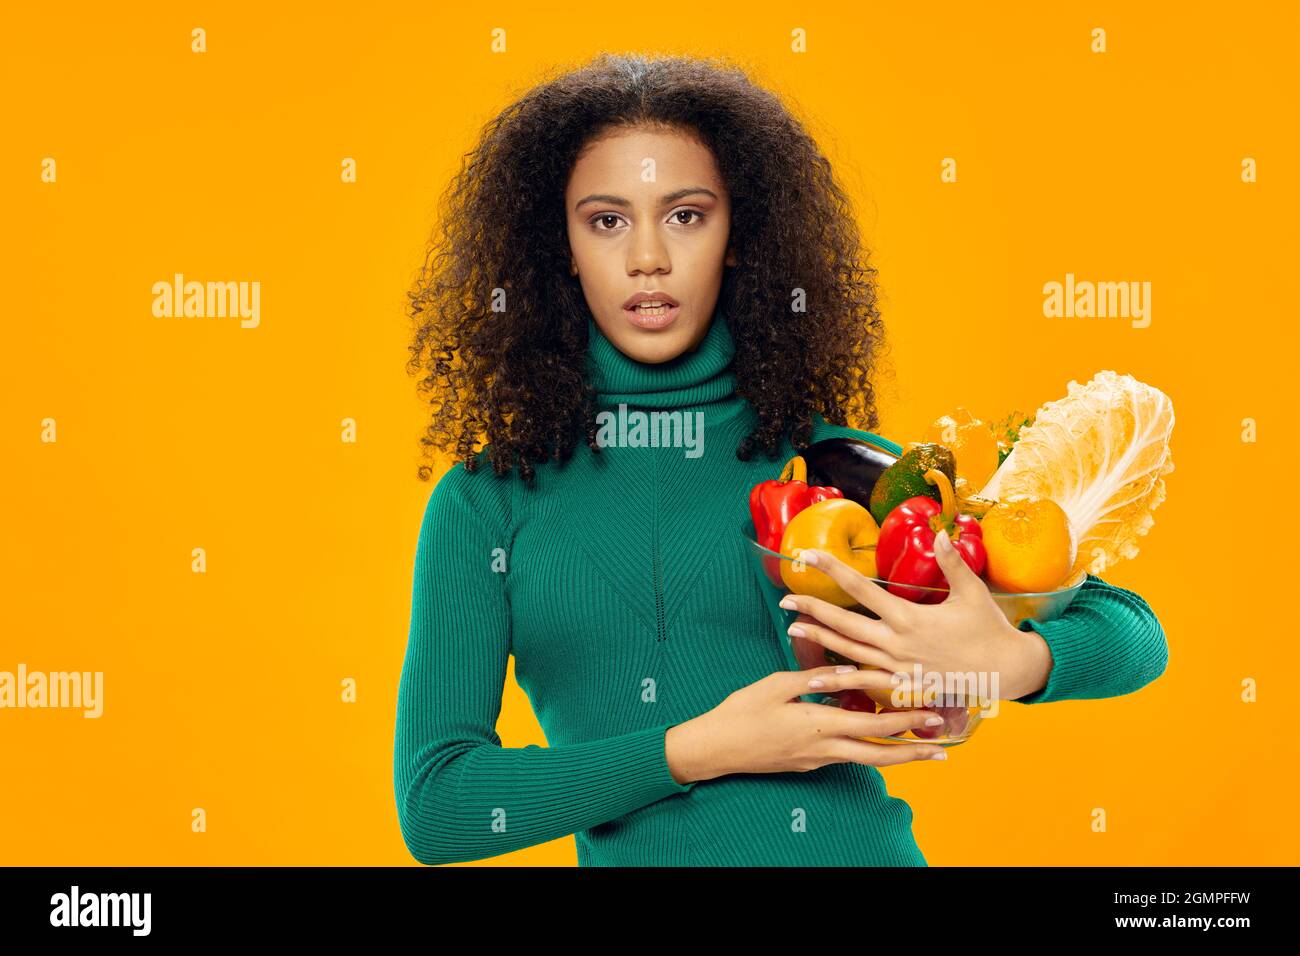 woman with curly hair foods vegetables diet food health Stock Photo - Alamy